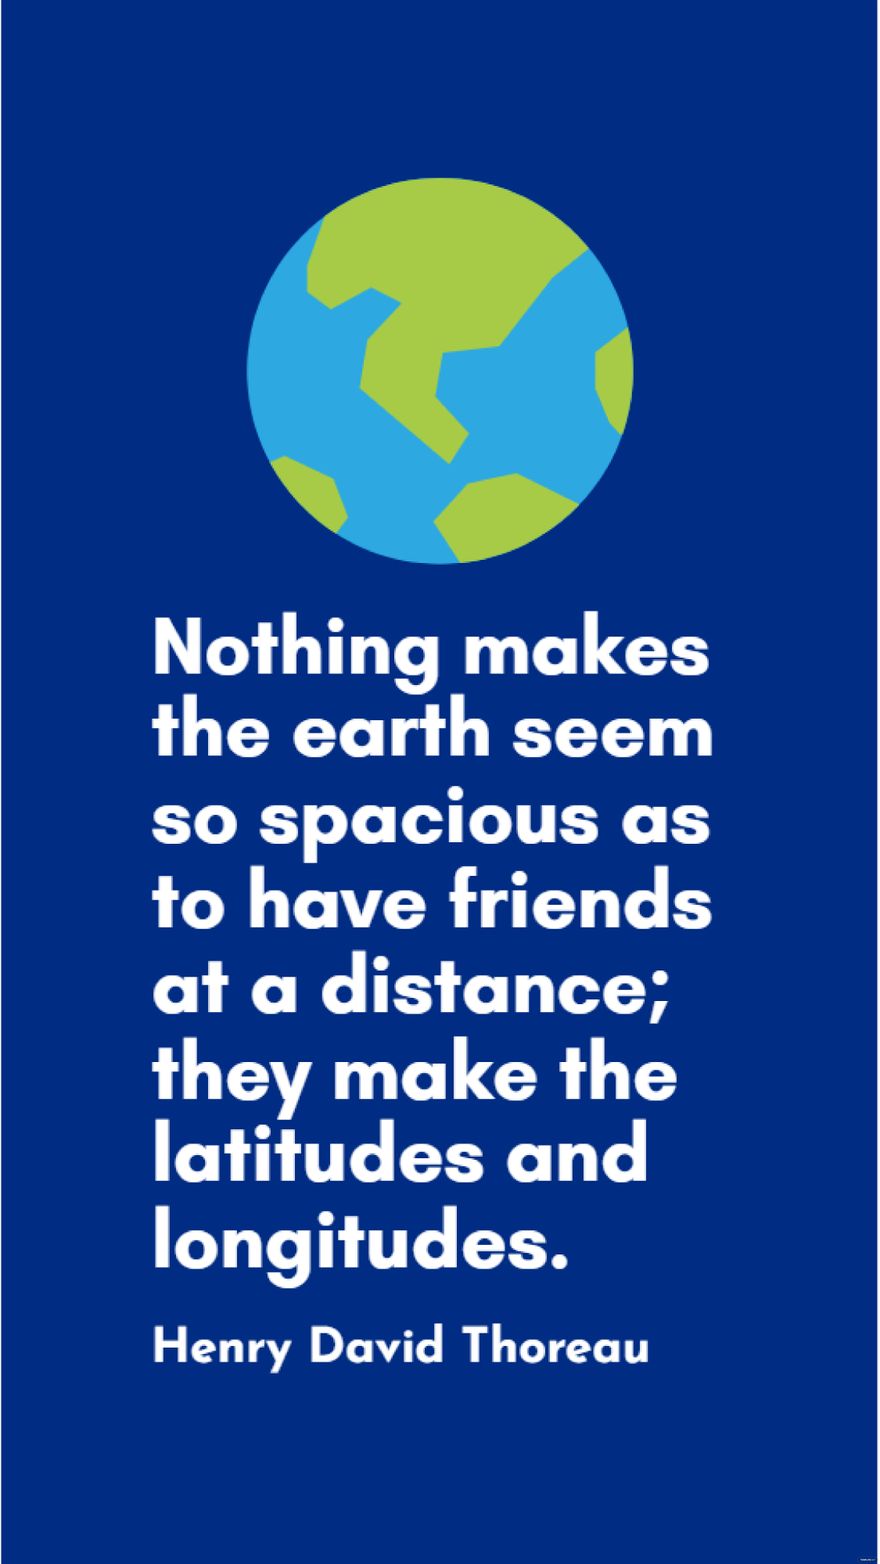 Free Henry David Thoreau - Nothing makes the earth seem so spacious as to have friends at a distance; they make the latitudes and longitudes. in JPG